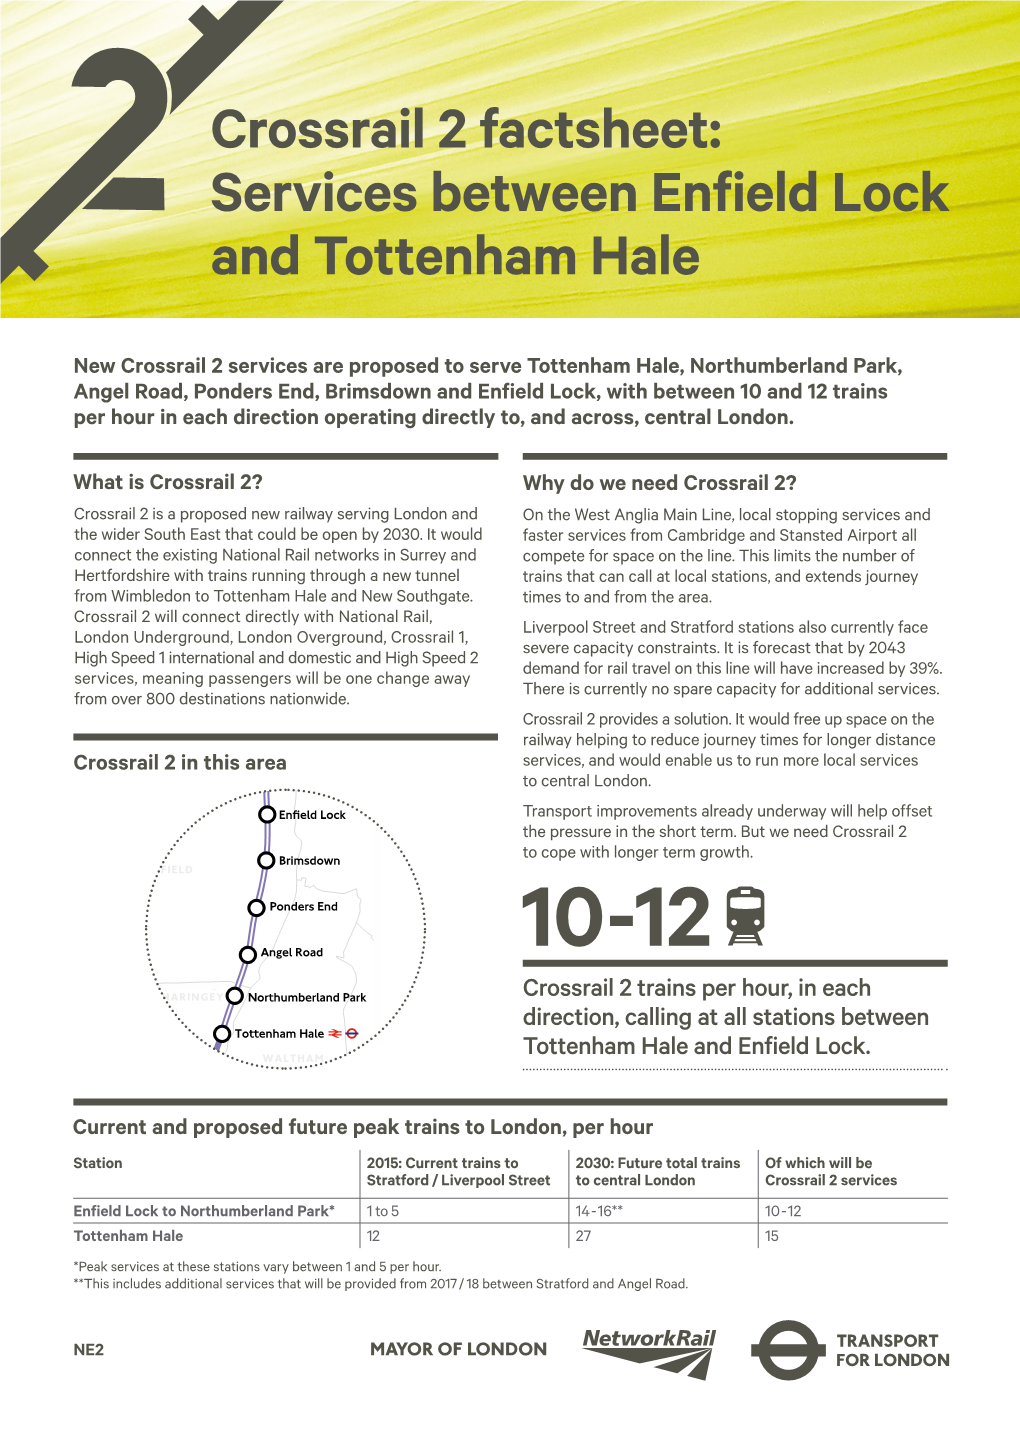 Services Between Enfield Lock and Tottenham Hale